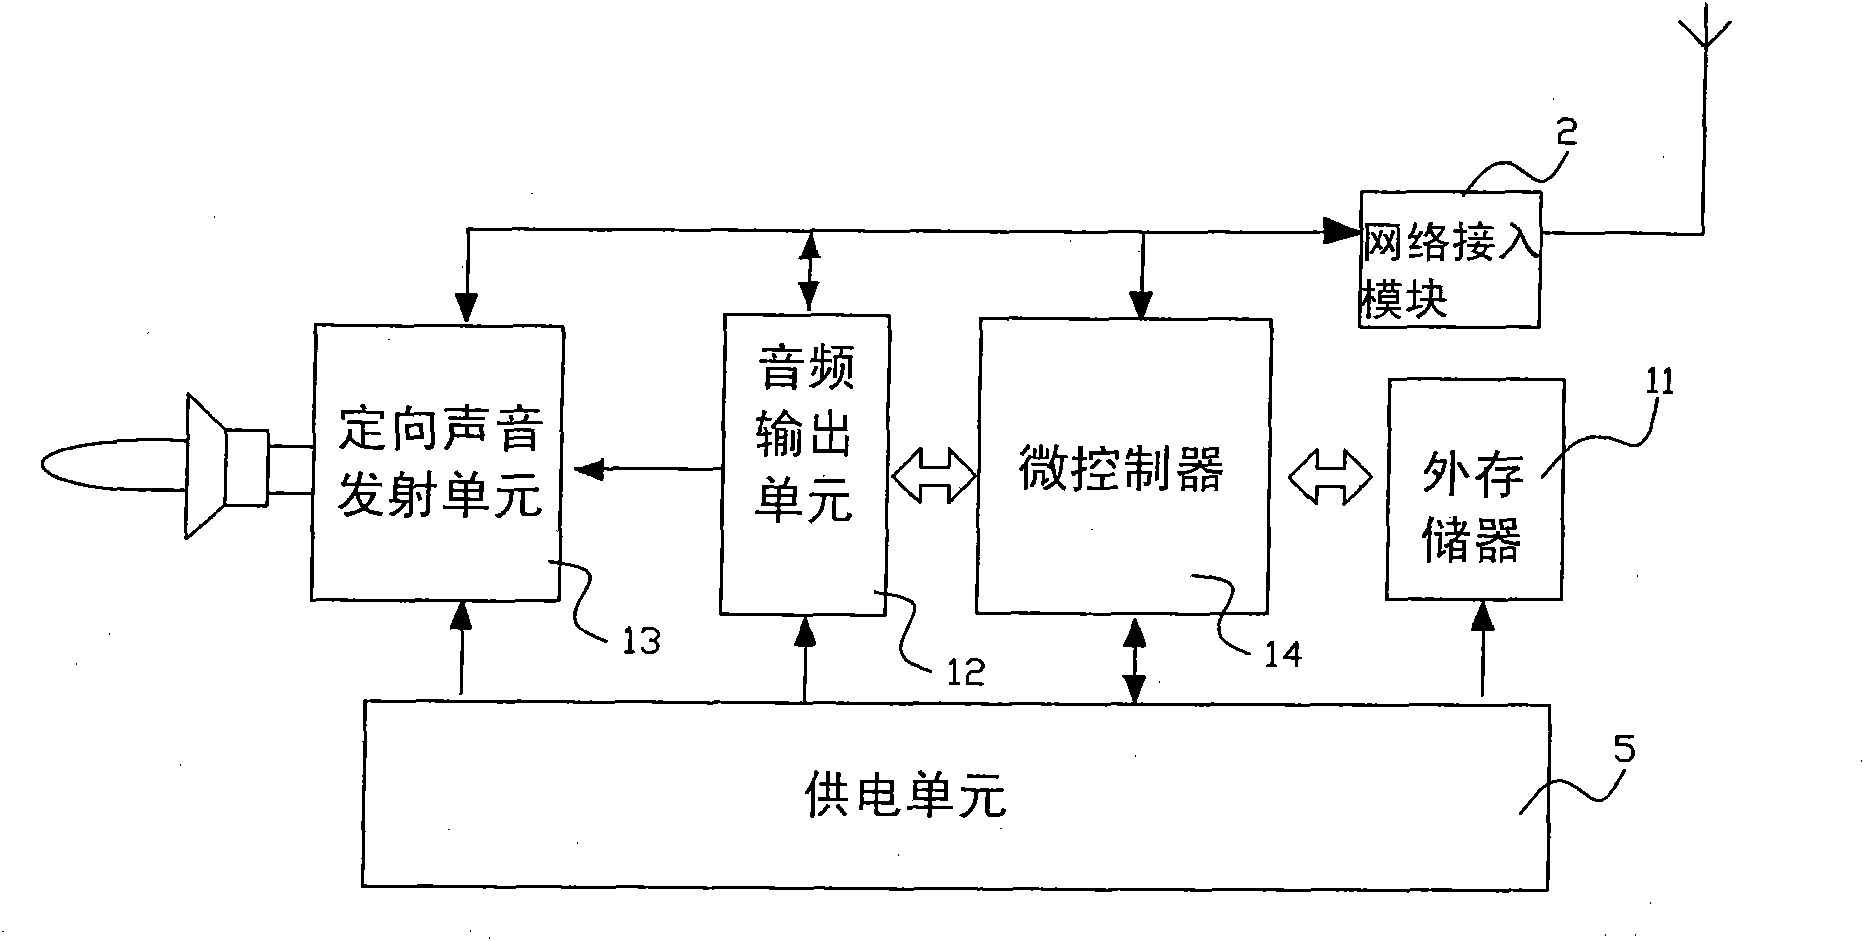 Directional sound advertisement system based on network control and network control method